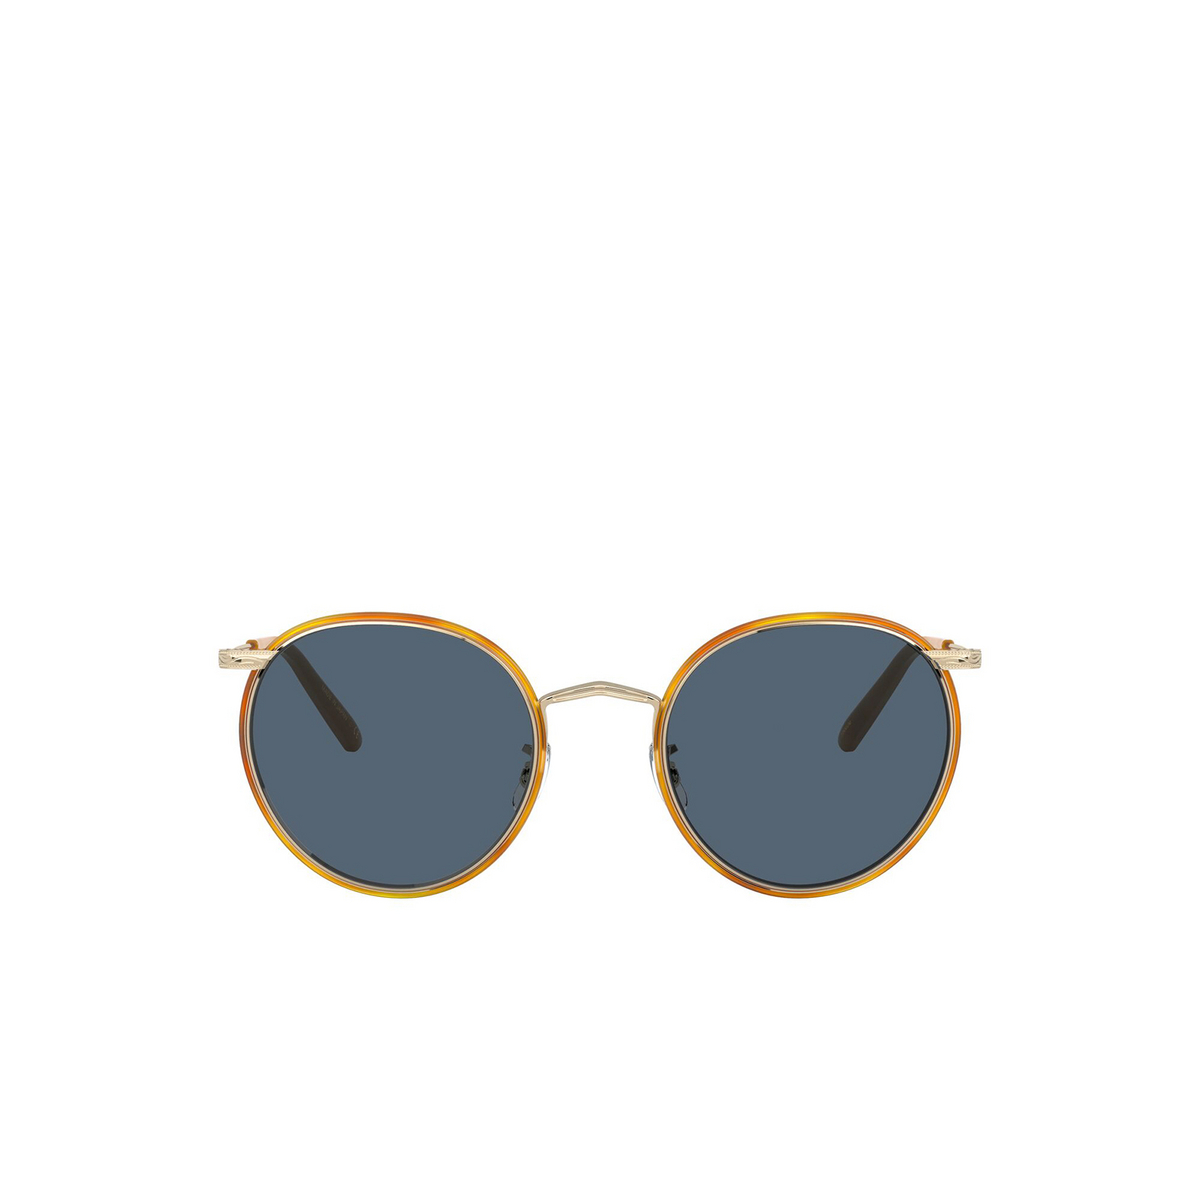 Oliver Peoples® Round Sunglasses: Casson OV1269ST color Soft Gold / Amber 503556 - front view.